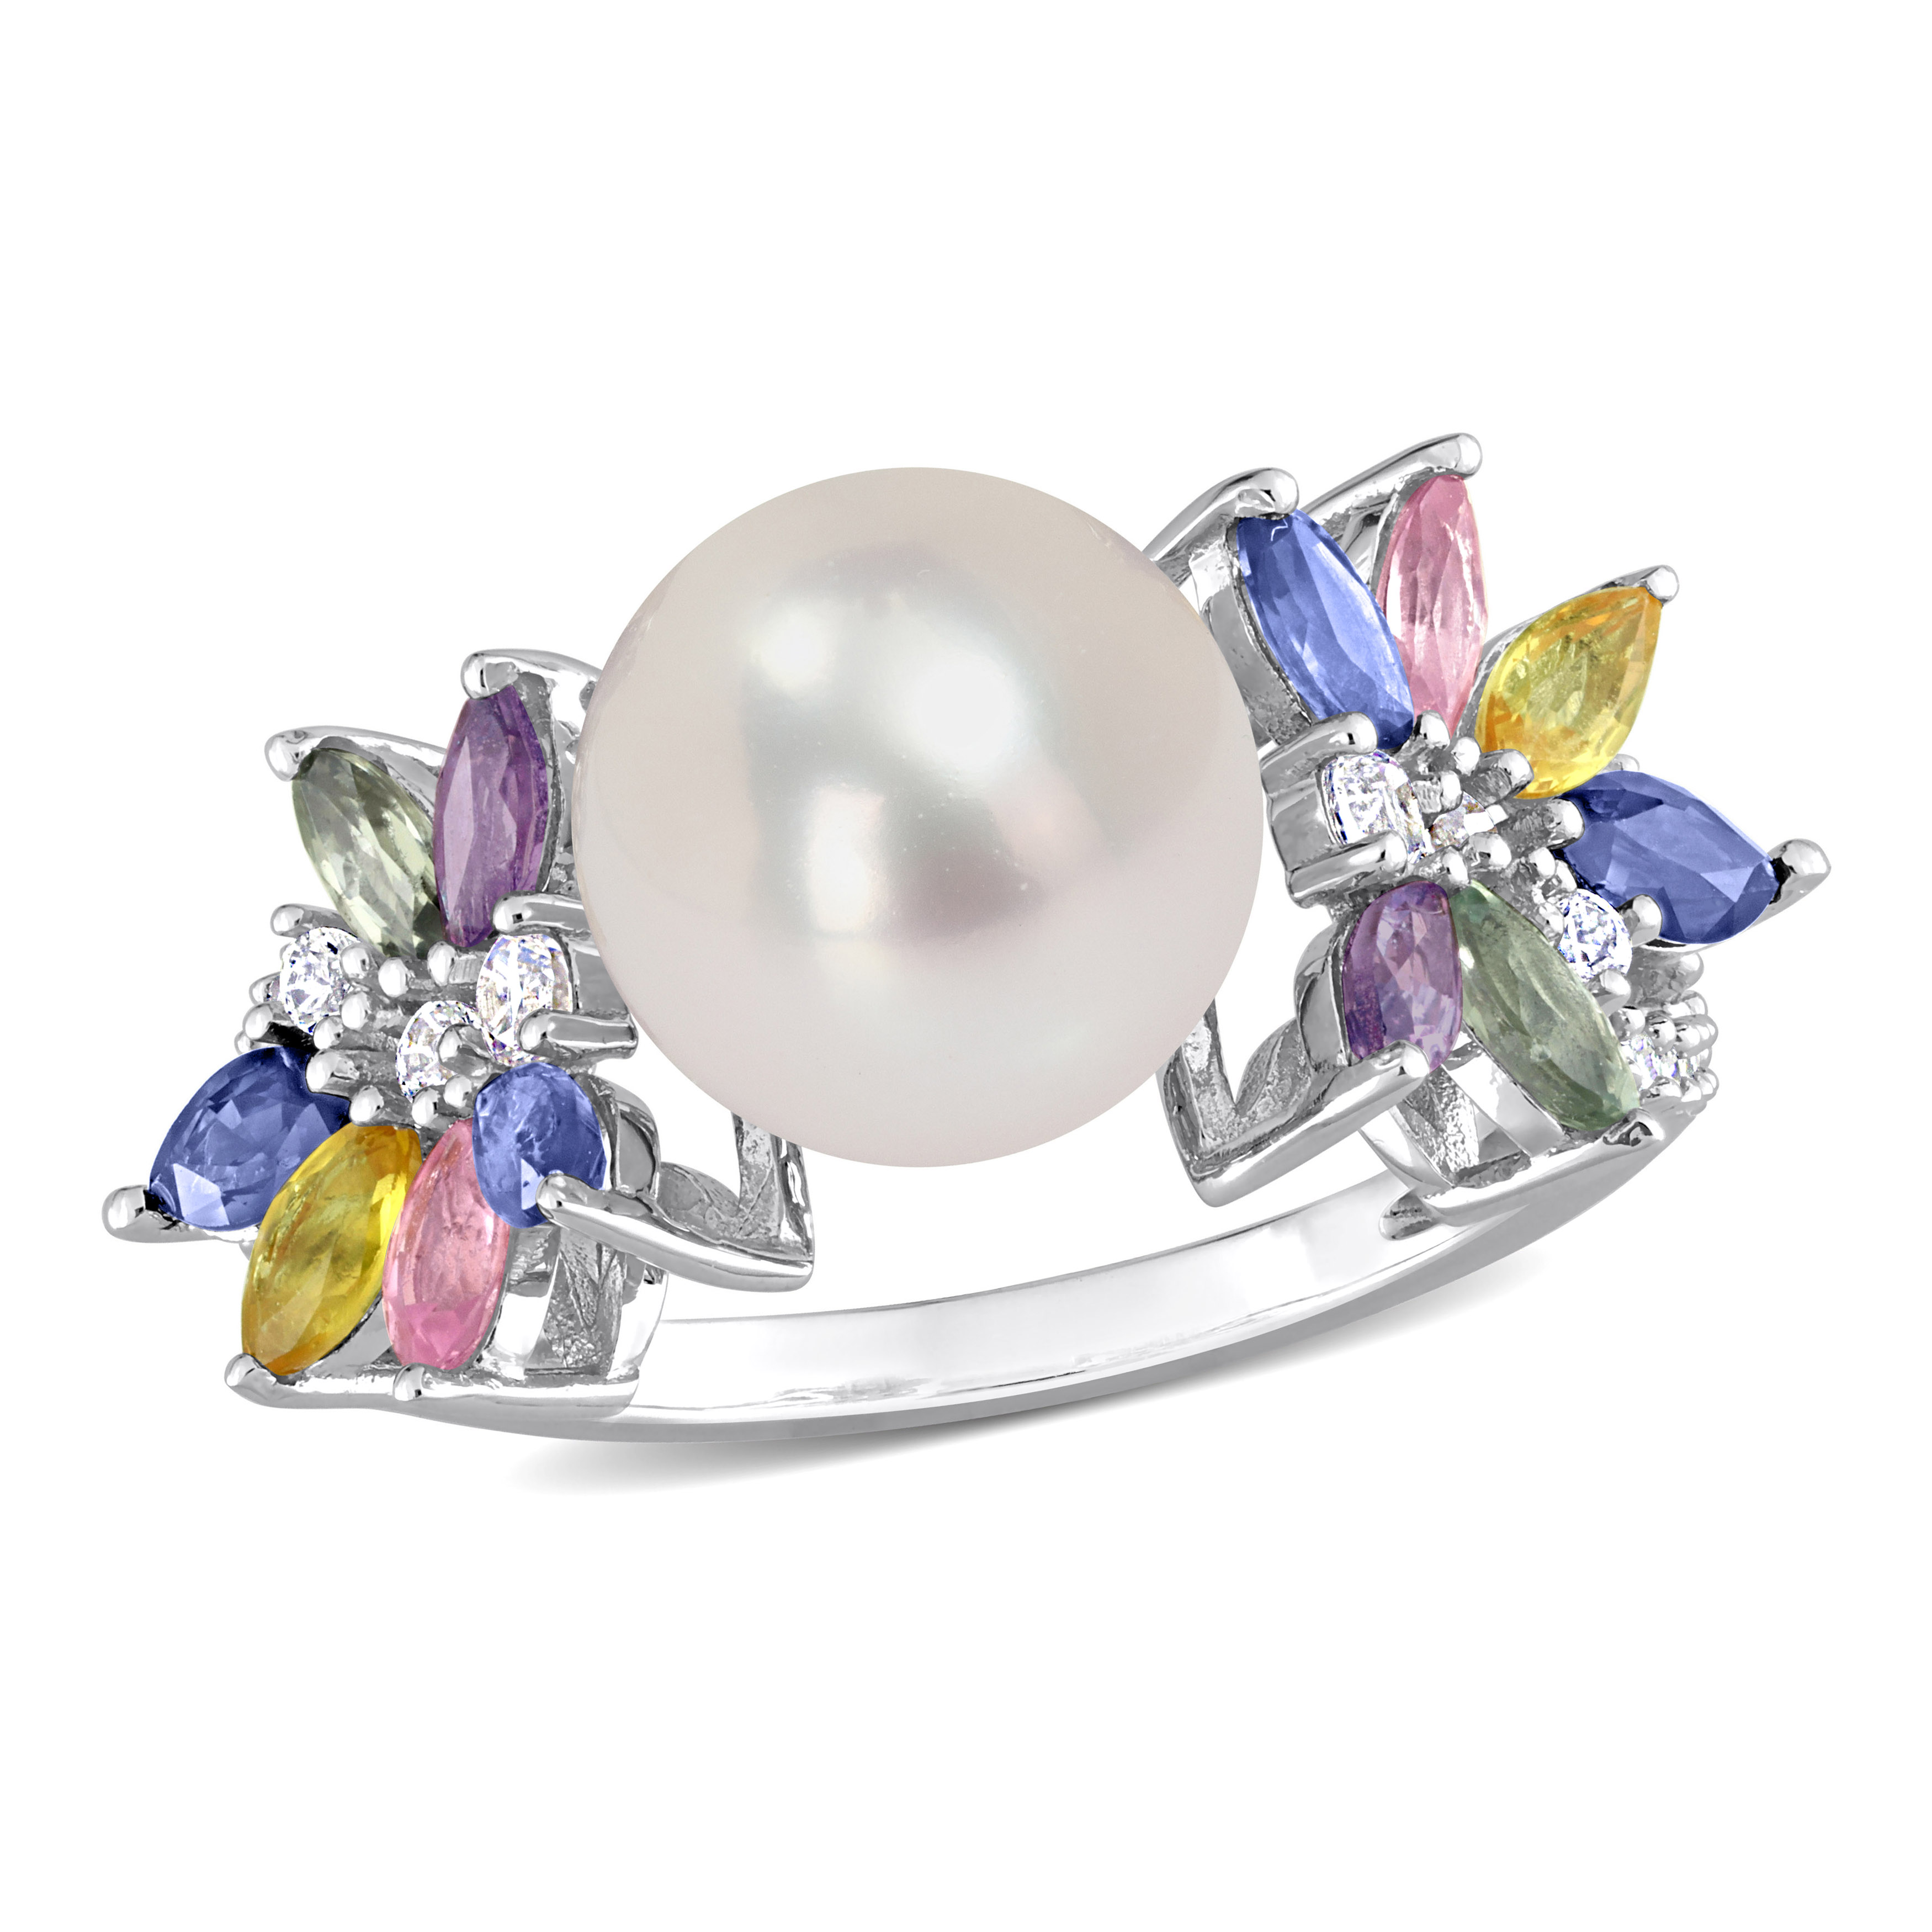 9-9.5mm Cultured Freshwater Pearl and 1 3/4 CT TGW Multi Sapphire and 1/8 CT TW Diamond Flower Ring in 14k White Gold